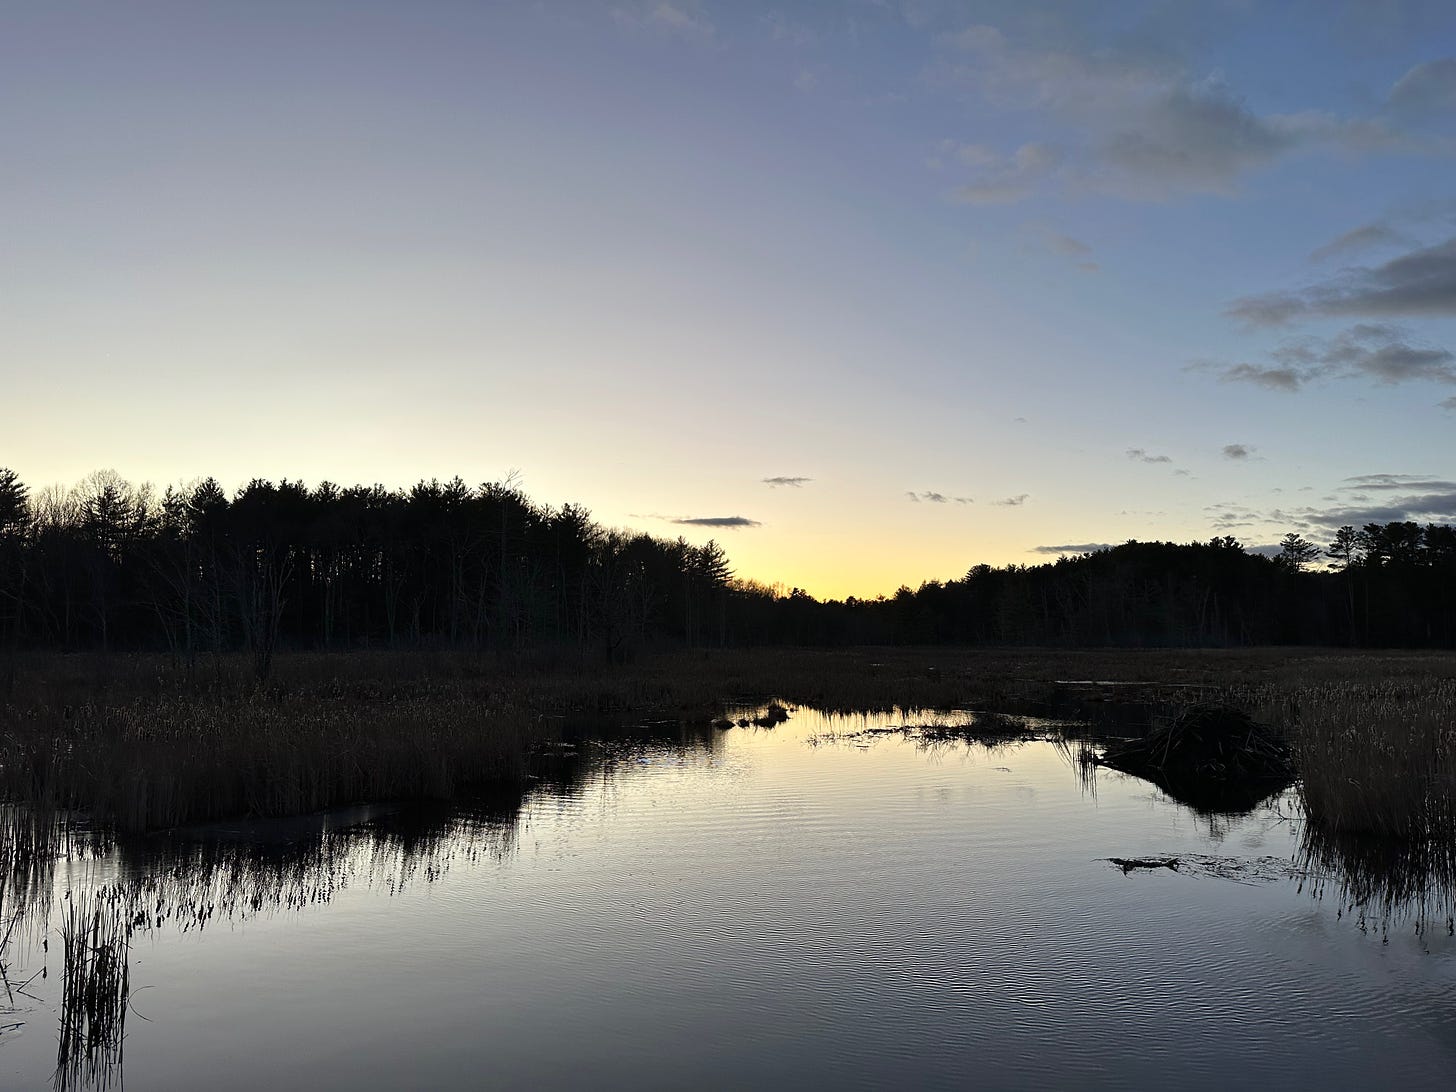 The sun is almost completely set between a silhouette of black forest, the sky moving from deep gray-blue at the top of the image, to white, to yellow sunk behind the trees. Breezes ripple an otherwise still pond along the bottom half of the image.